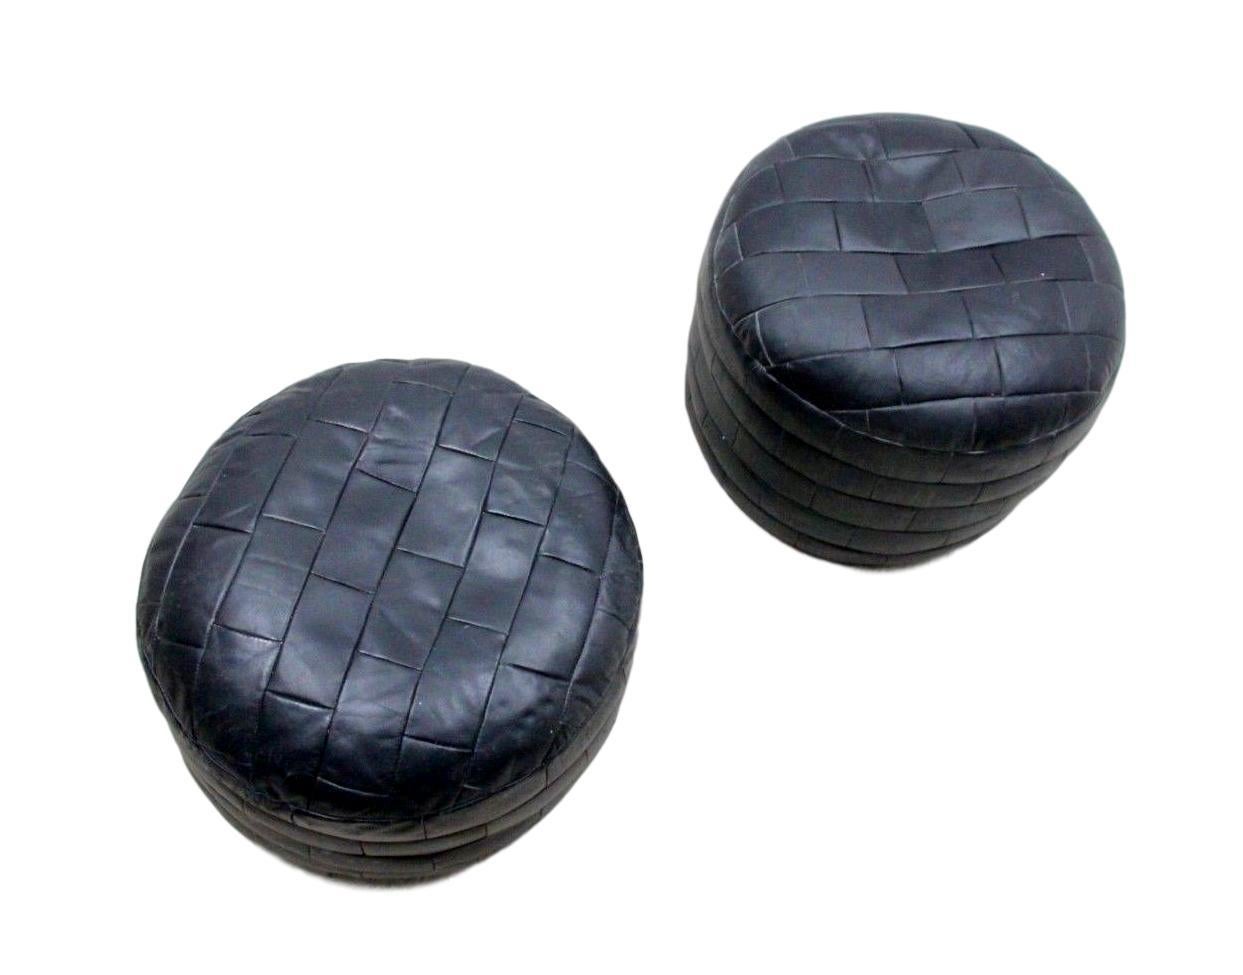 Gorgeous patchwork black leather ottomans by De Sede. Great coloring and patina to leather. Very good condition.

Two available. Priced individually.